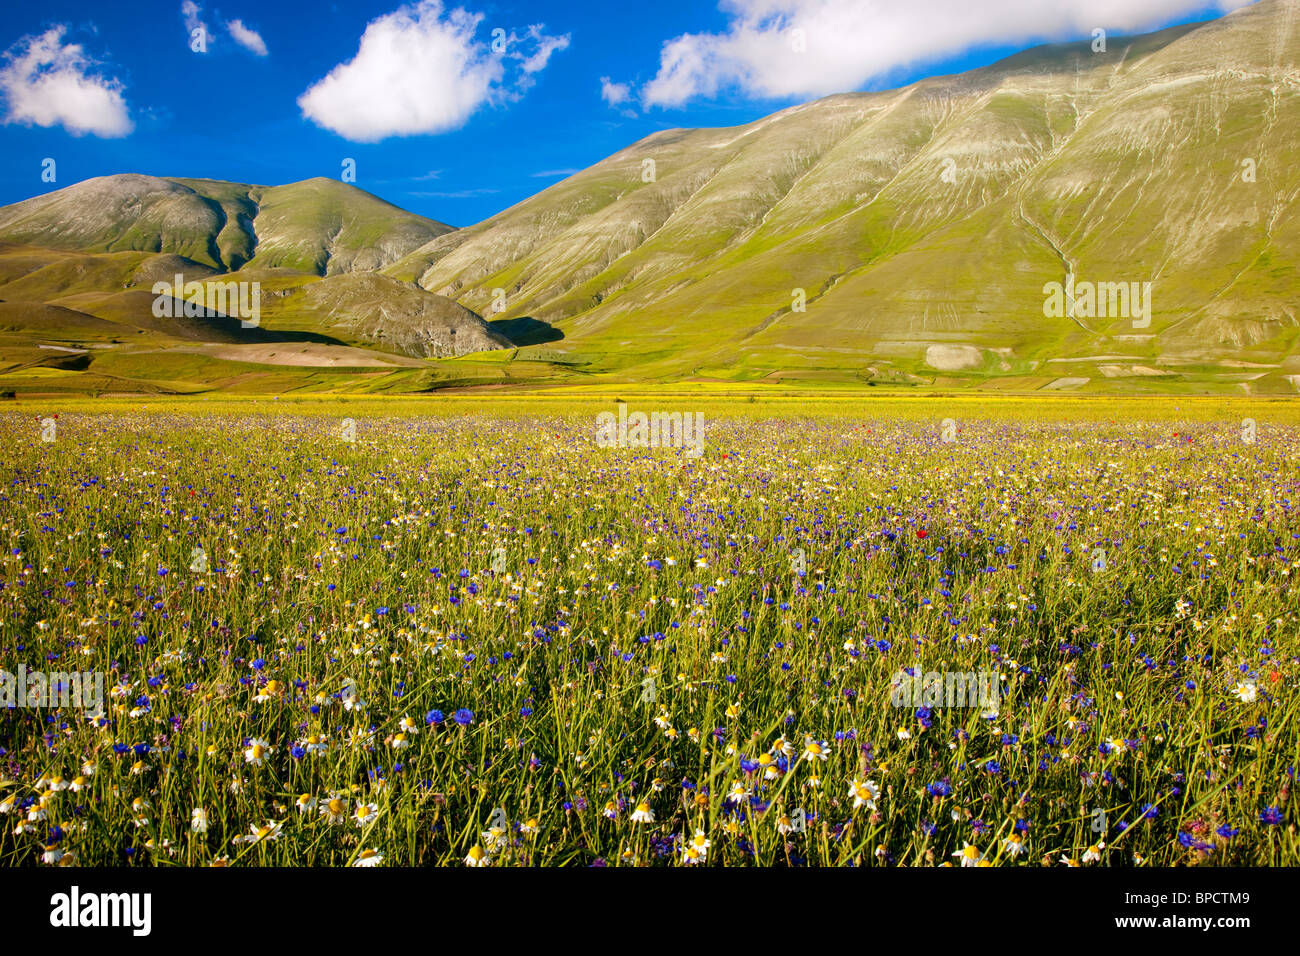 Wildflowers at the foot of the mountains of the Piano Grande in Monti Sibillini National Park, Umbria Italy Stock Photo